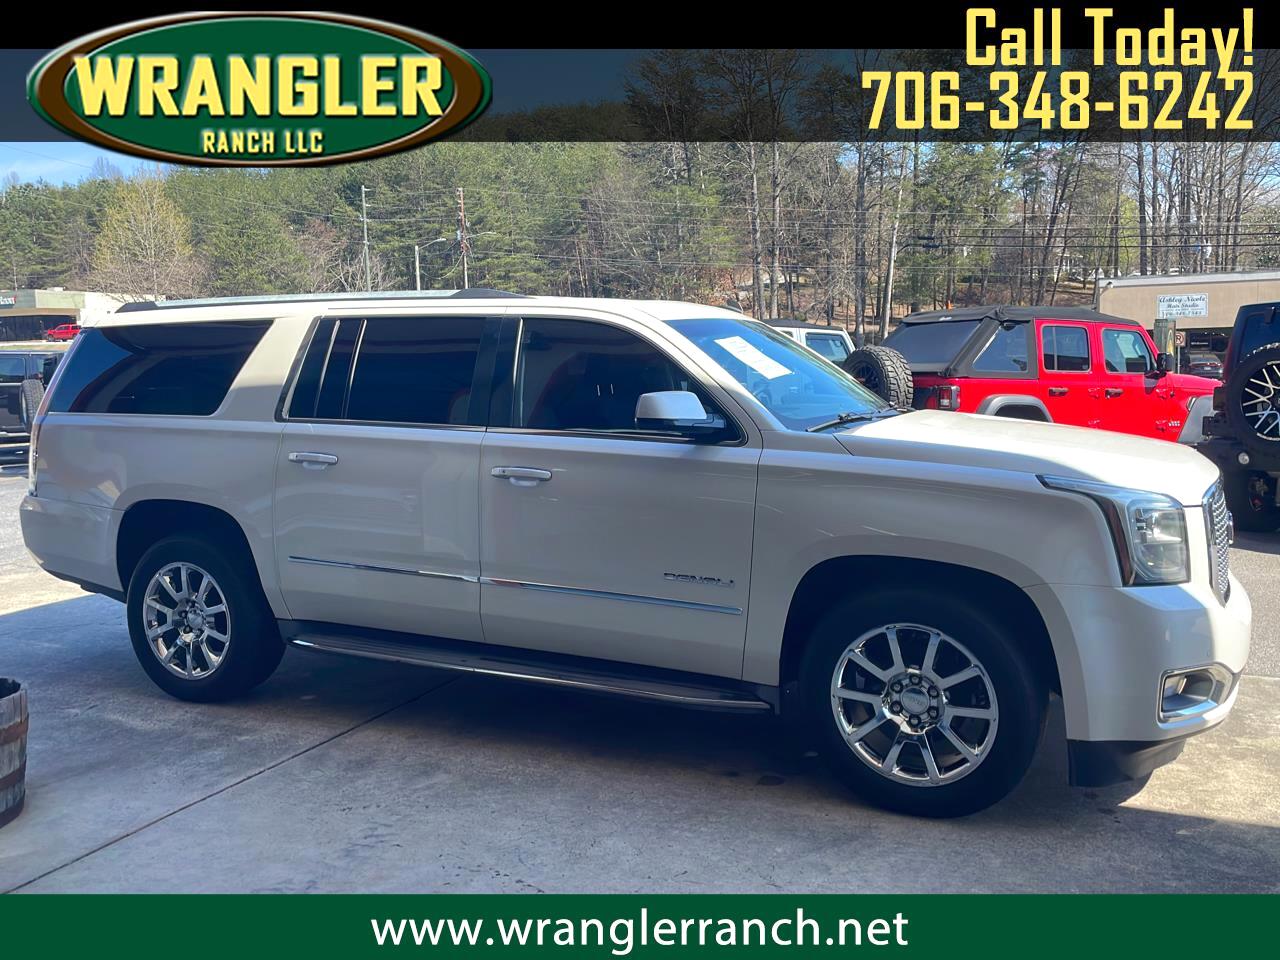 Used Cars for Sale Cleveland GA 30528 The Wrangler Ranch